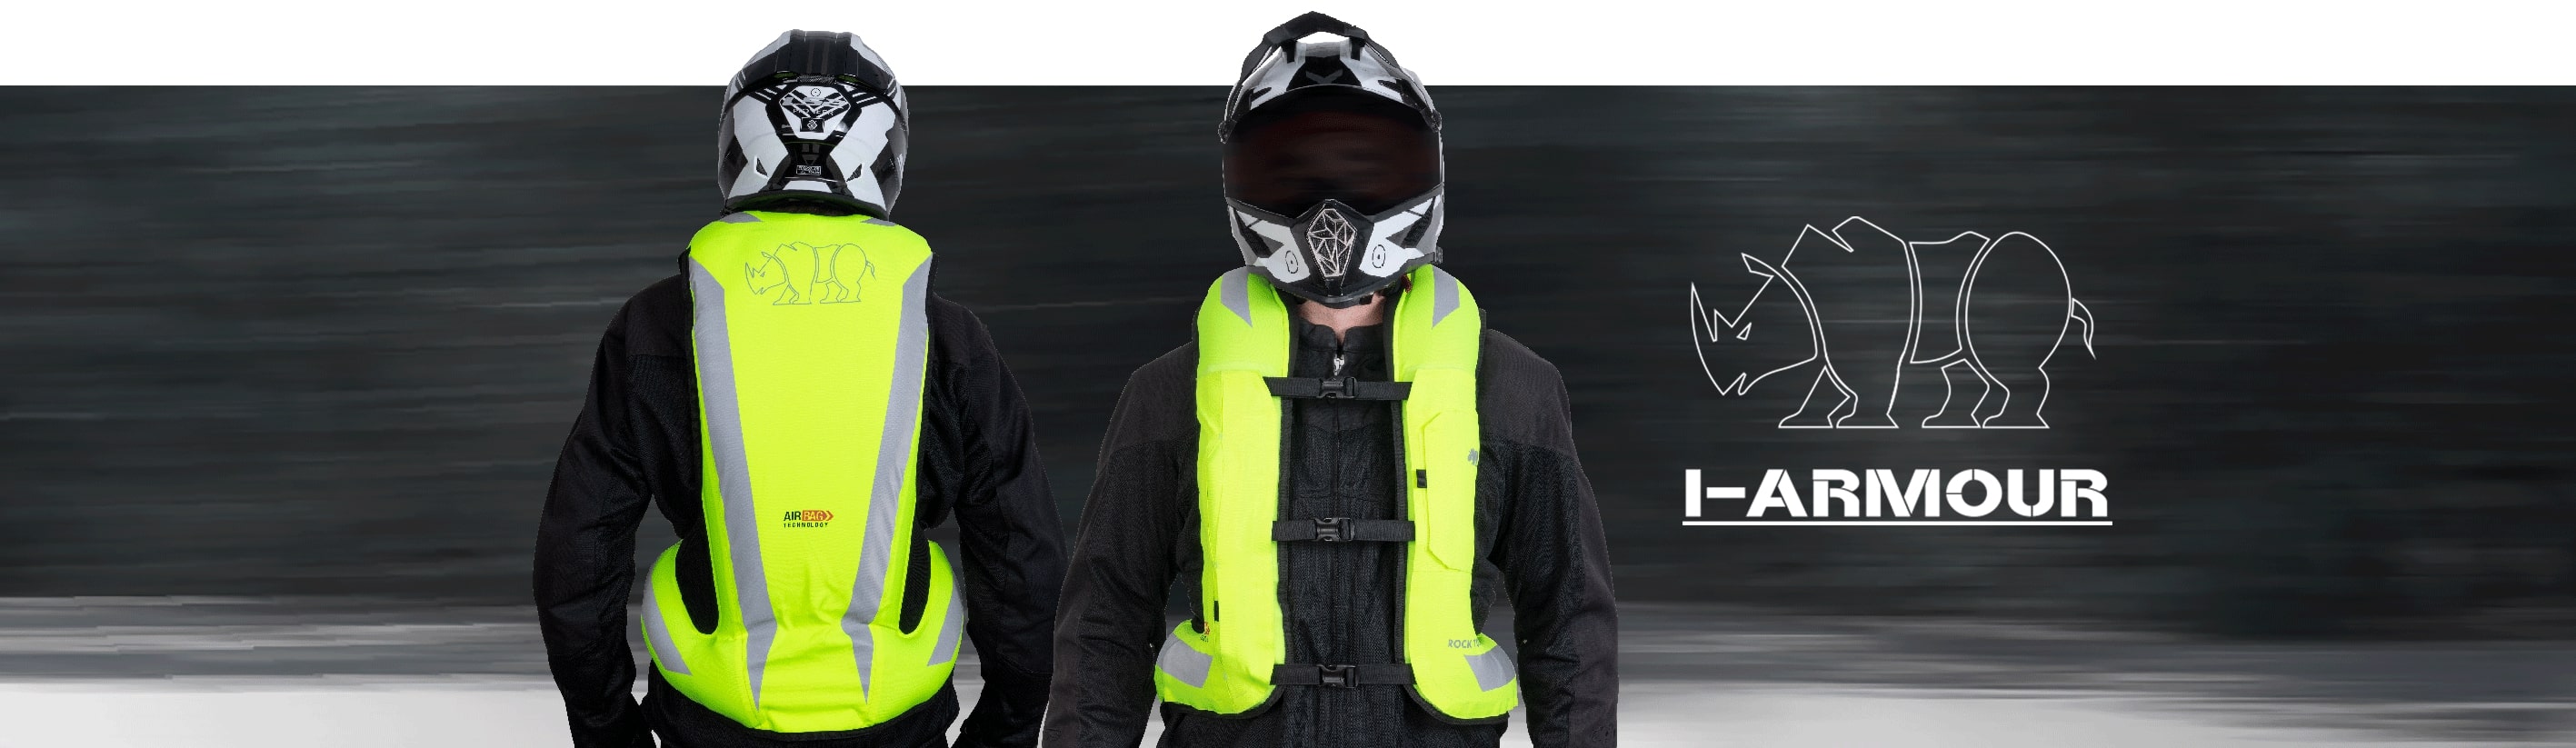 Gilet airbag pour moto rock tool CO air pack